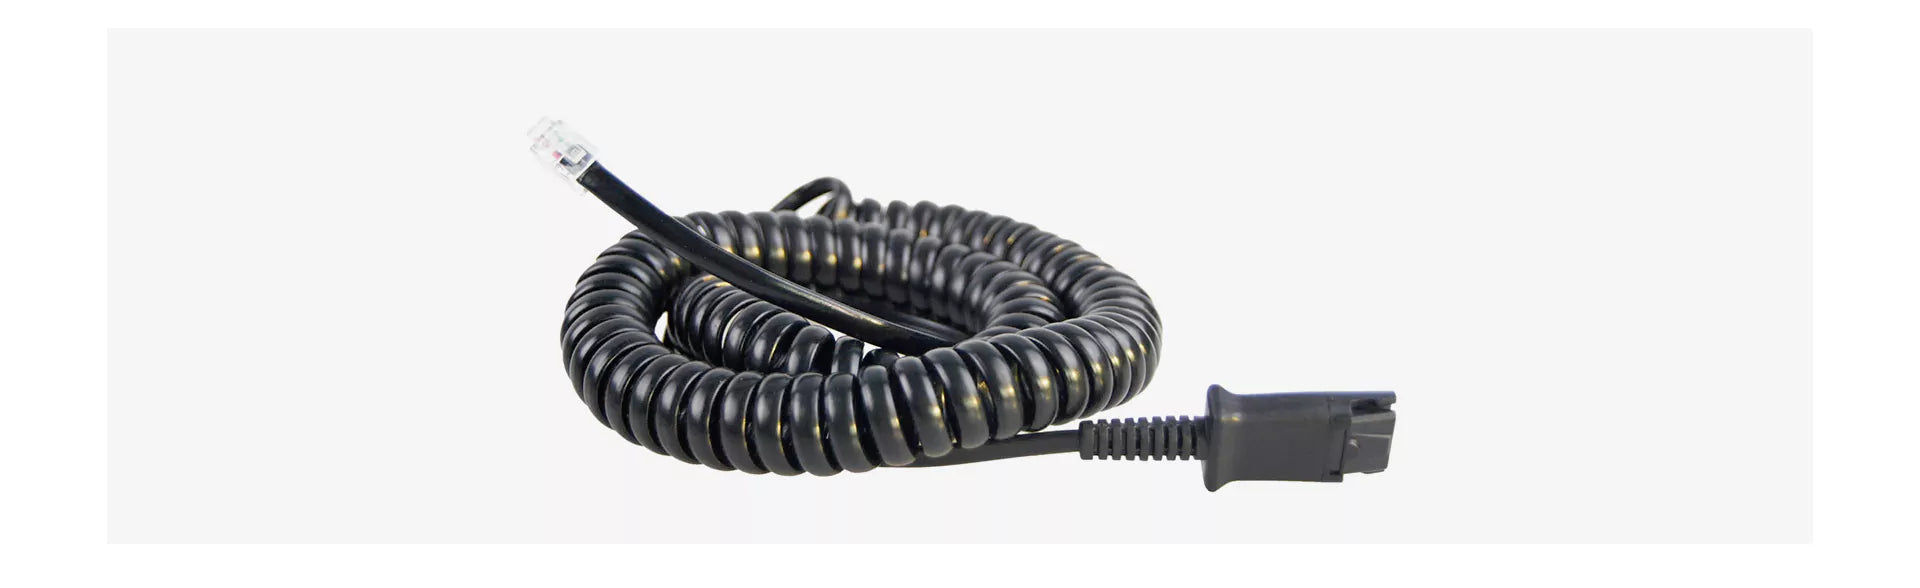 3.5mm stereo QD connecting cord with coiled cord